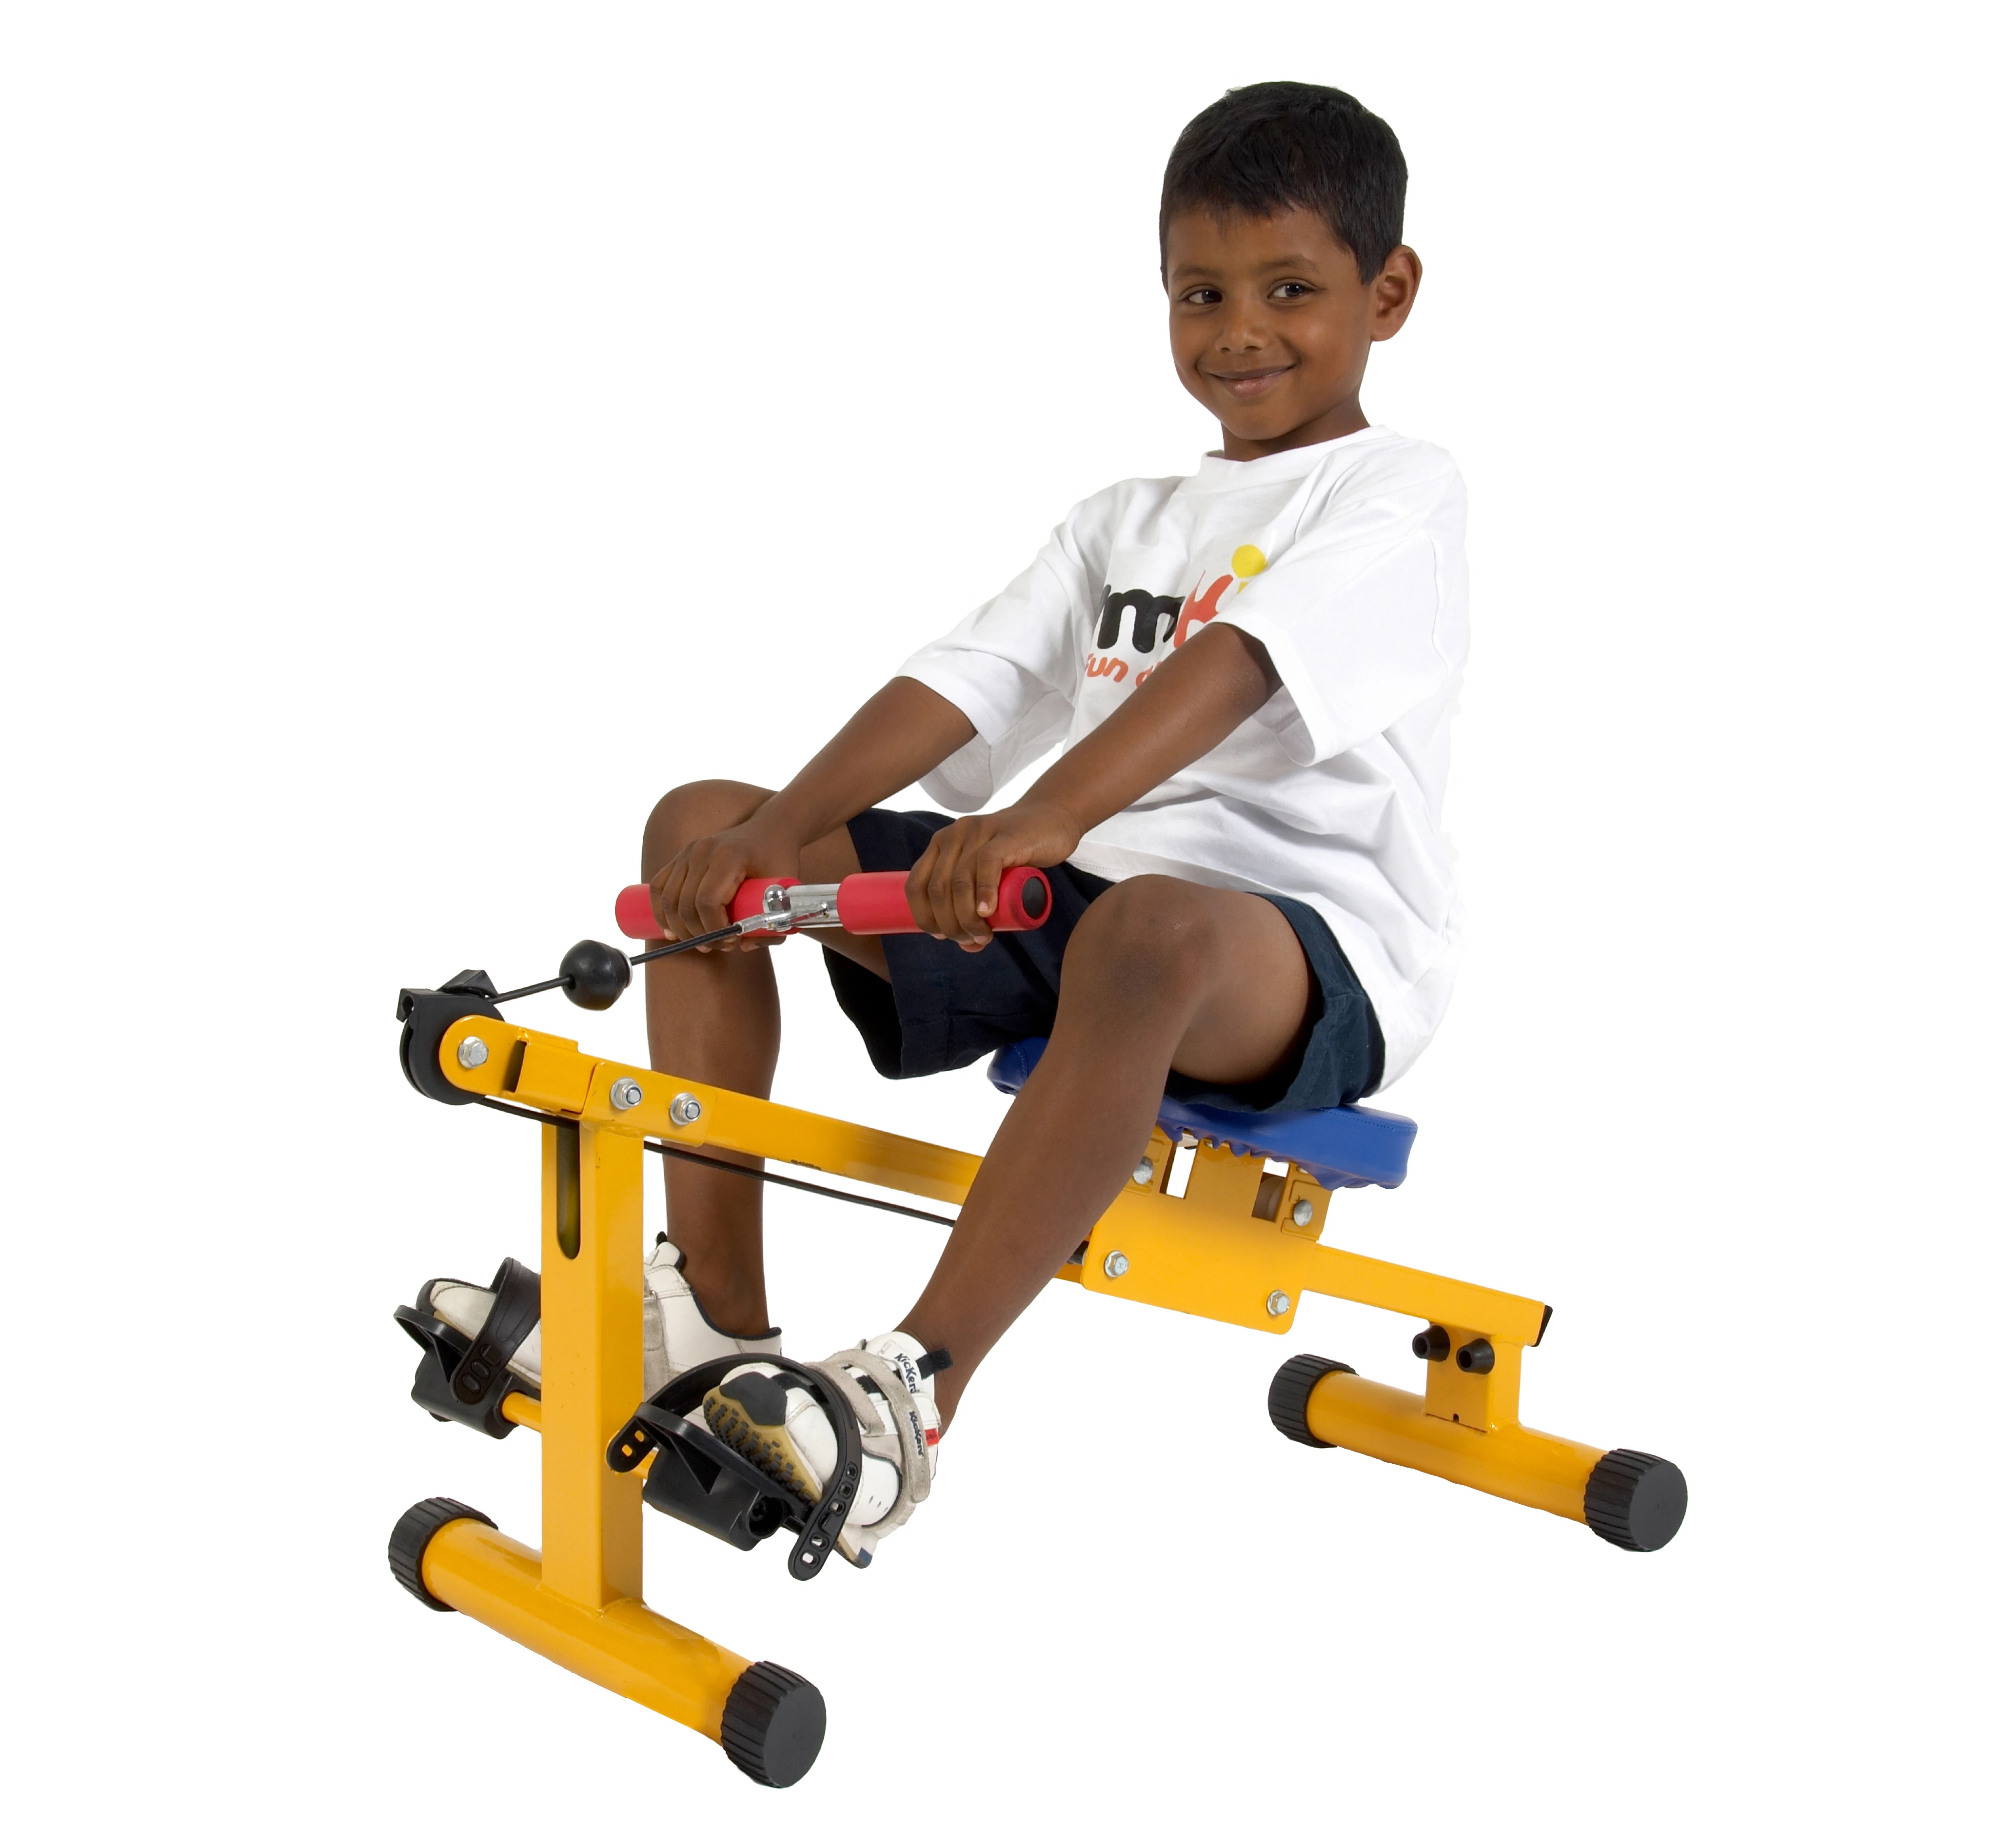 Kids Weight Bench For Fitness Buy Small Weight Benches